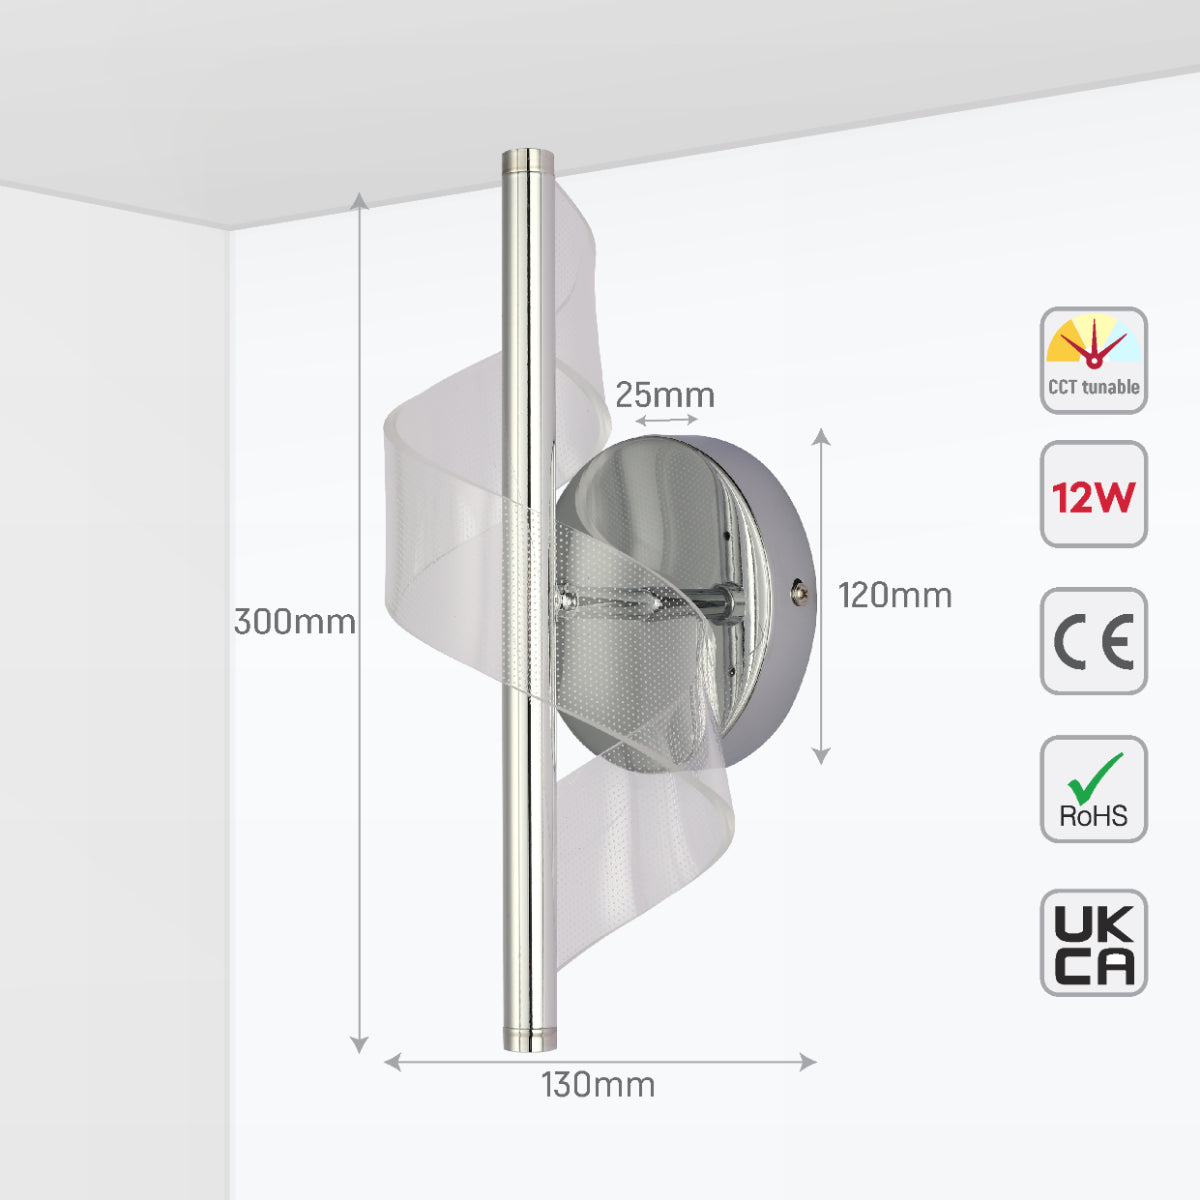 Size and certifications of LED Spiral Modern Wall Sconce Light Chrome CCT Changable 151-19702